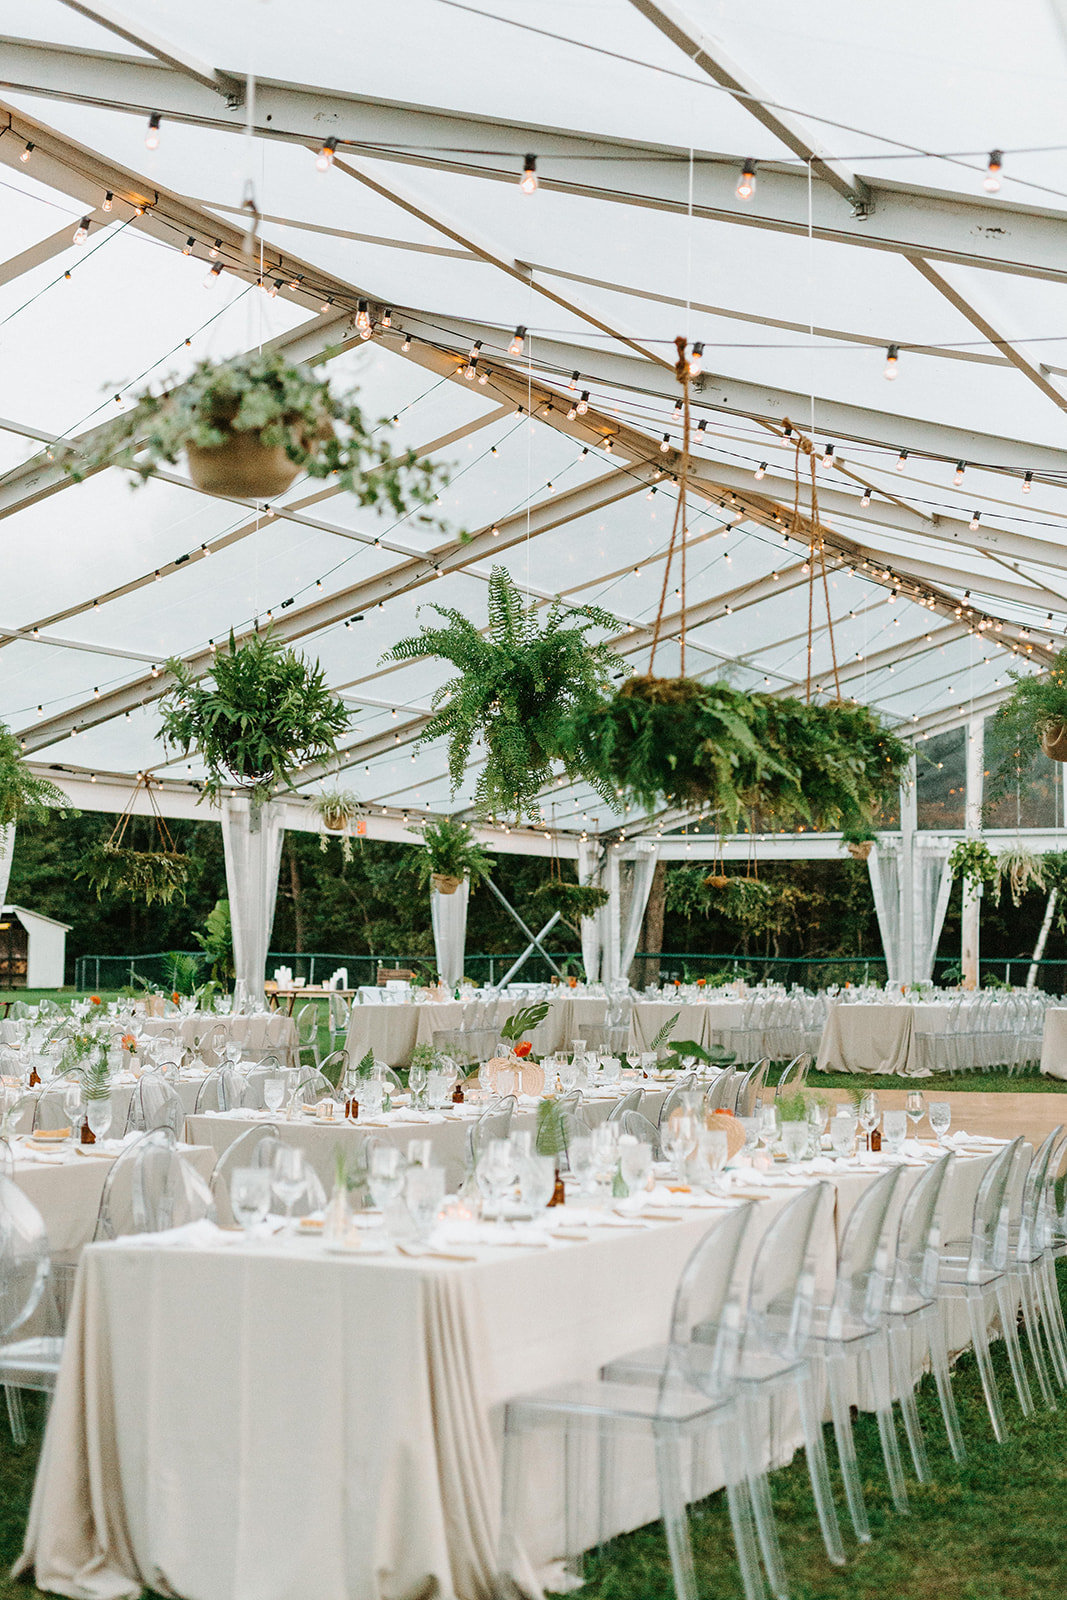 Monica-Relyea-Events-Hyde-Photography-Camp-Scatico-Wedding-Upstate-New-York-NY-Hudson-Valley-Elizaville-Tivoli-Tropical-Clear-Tent-Outdoor-NYC-Planner-Fall-Jewish-611